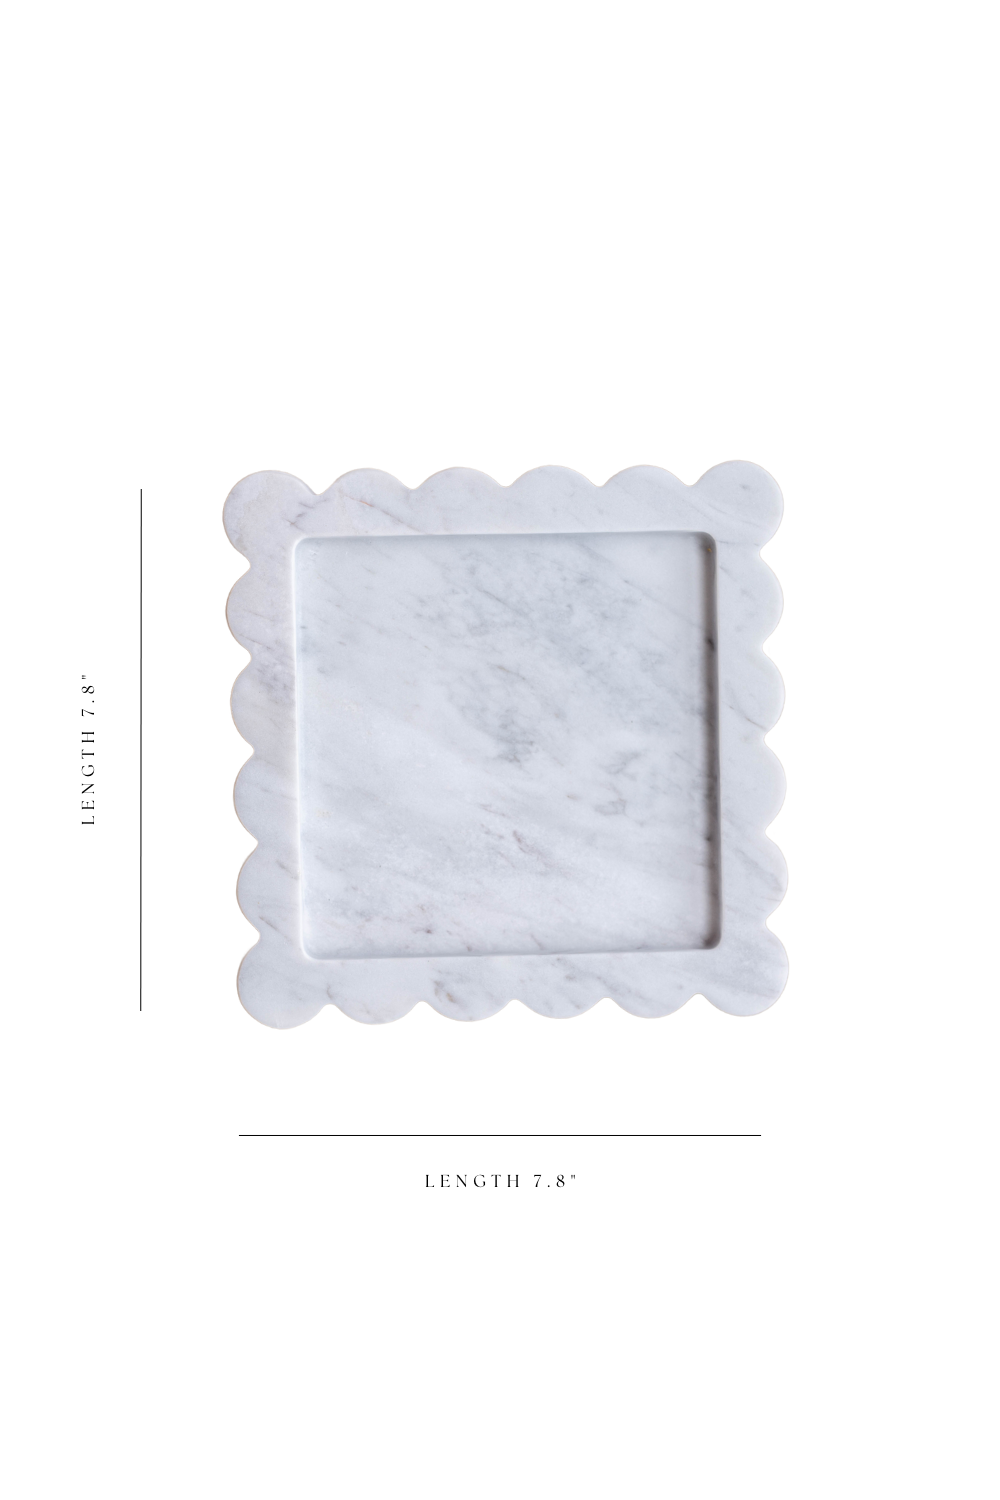 White Marble Scalloped Tray - Luxe B Pampas Grass  Vintage Home Decor Shop Luxe B Co Instagram